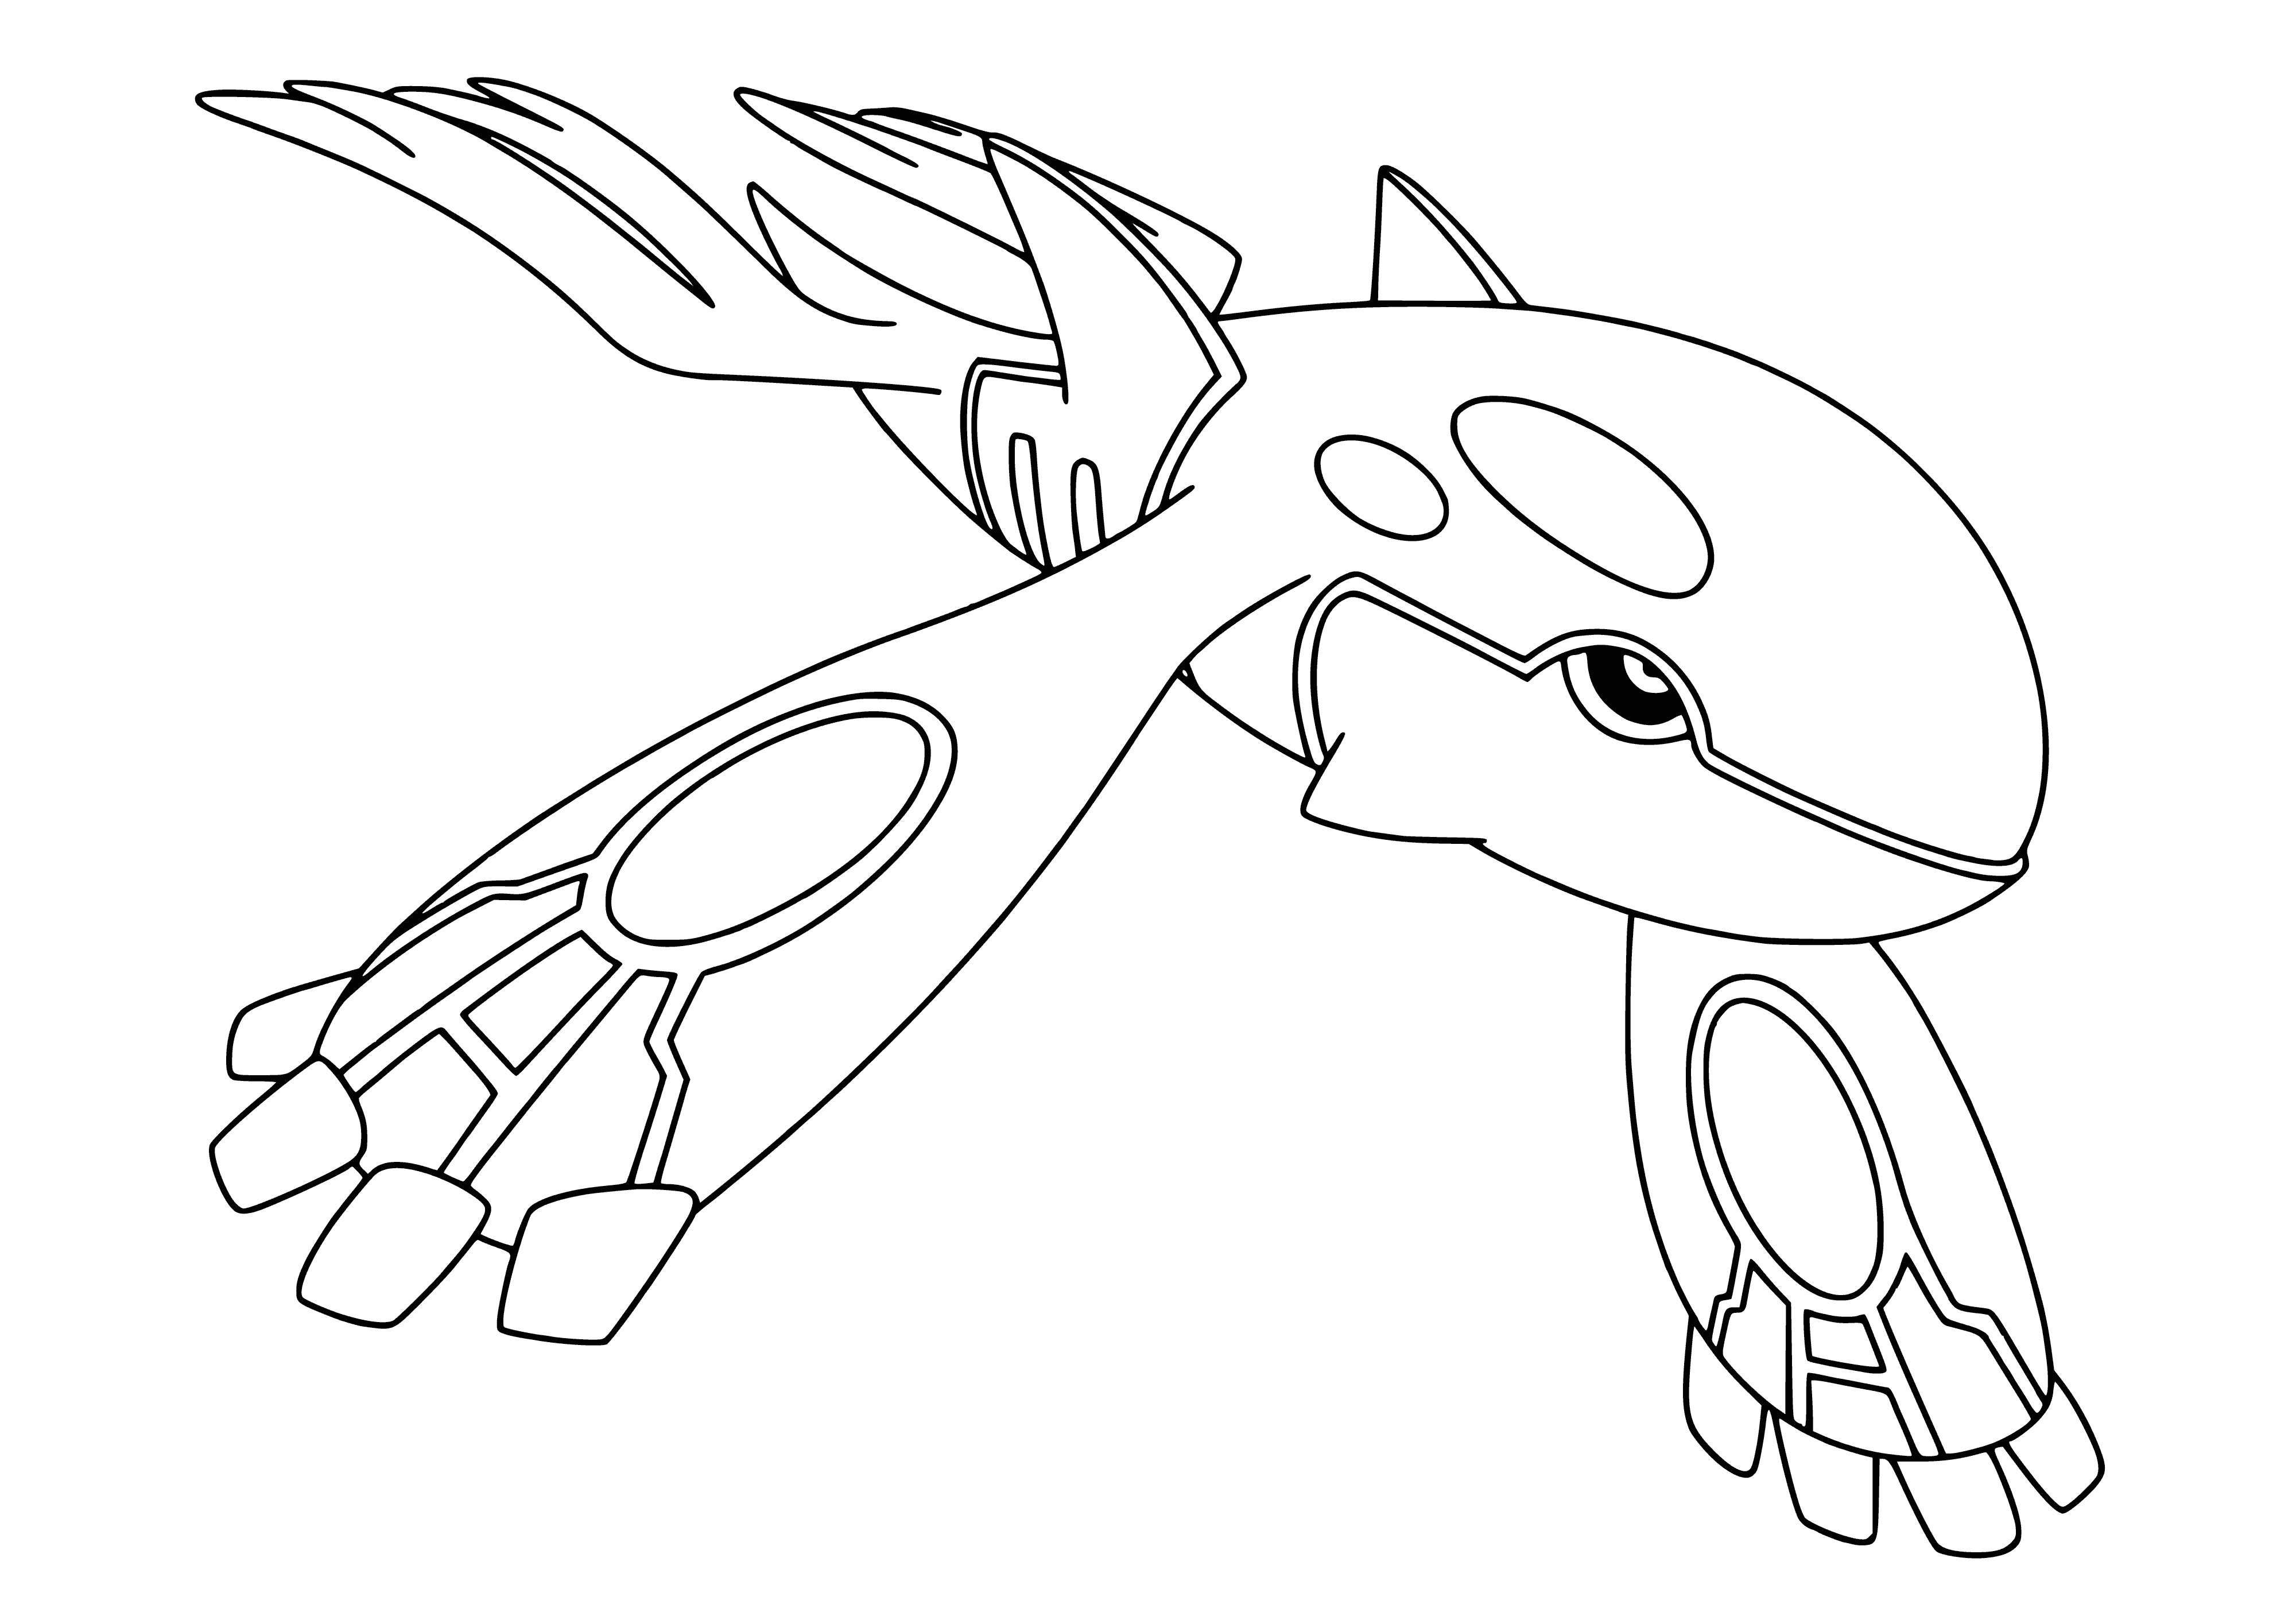 Legendary Pokemon Kyogre coloring page